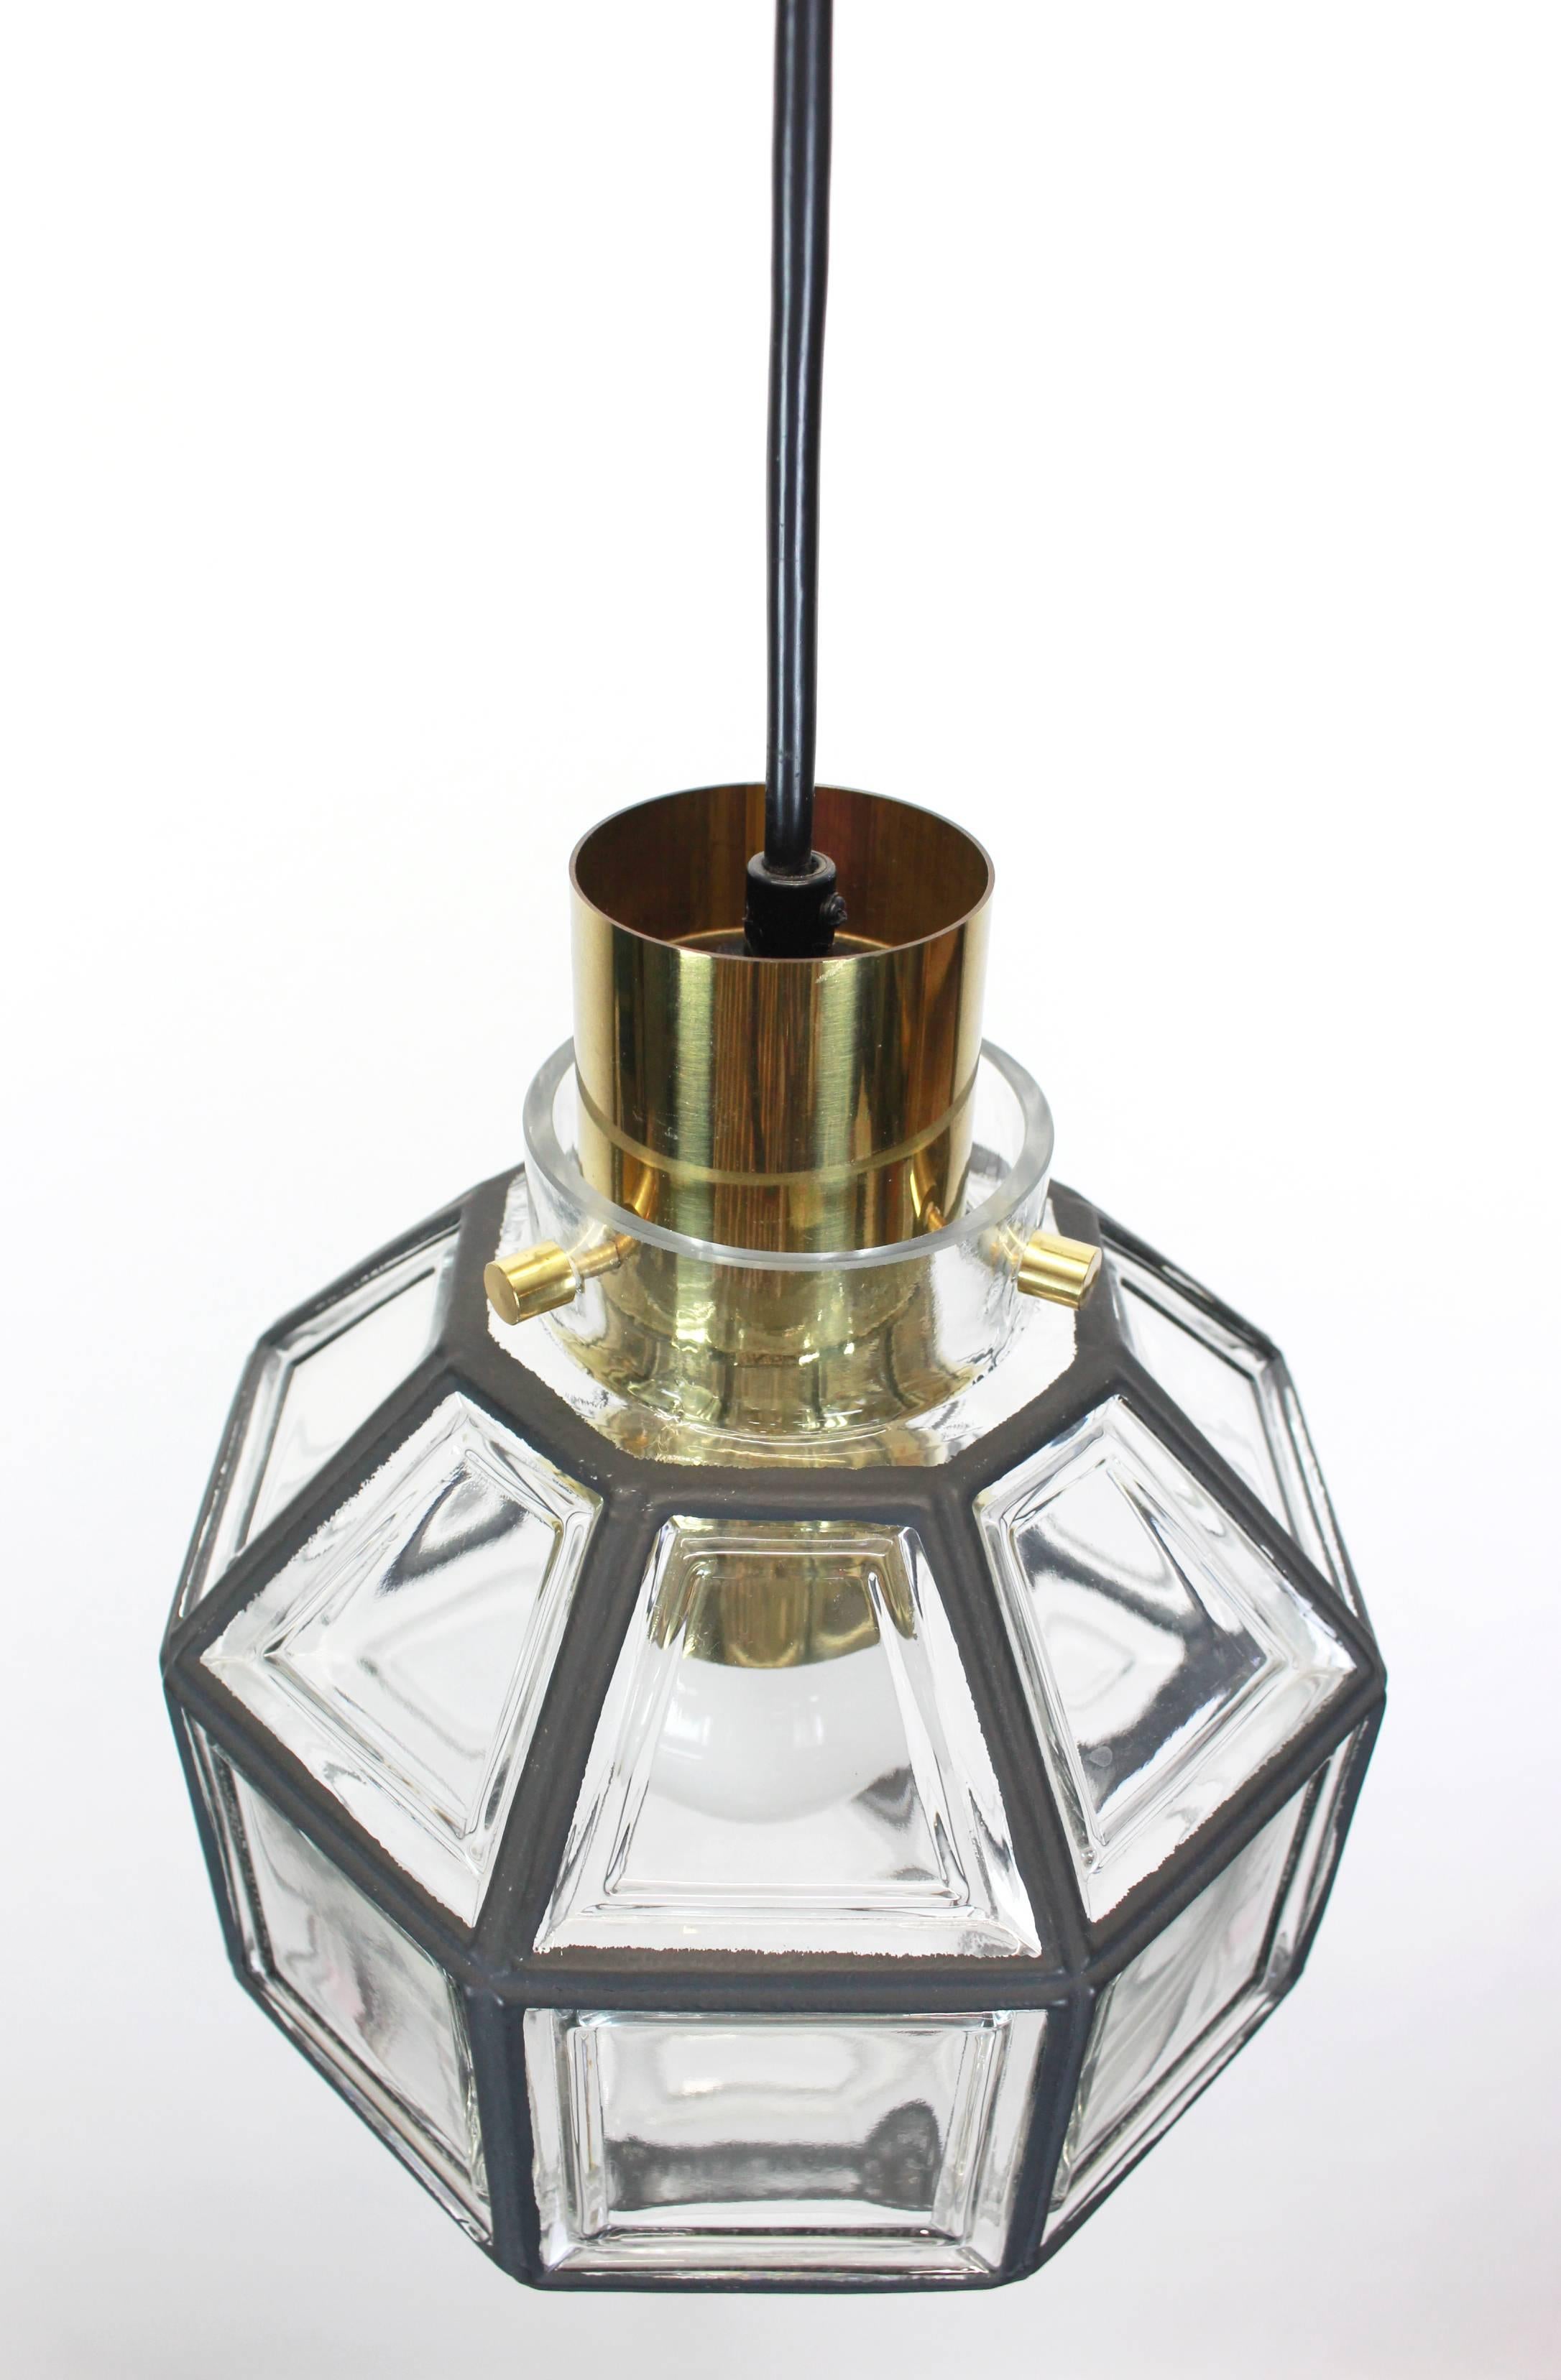 Minimalist iron and clear glass pendant light manufactured by Limburg Glashütte, Germany, circa 1960-1969. Octagonal shaped lantern and multi-faceted clear glass.

High quality and in very good condition. Cleaned, well-wired and ready to use.